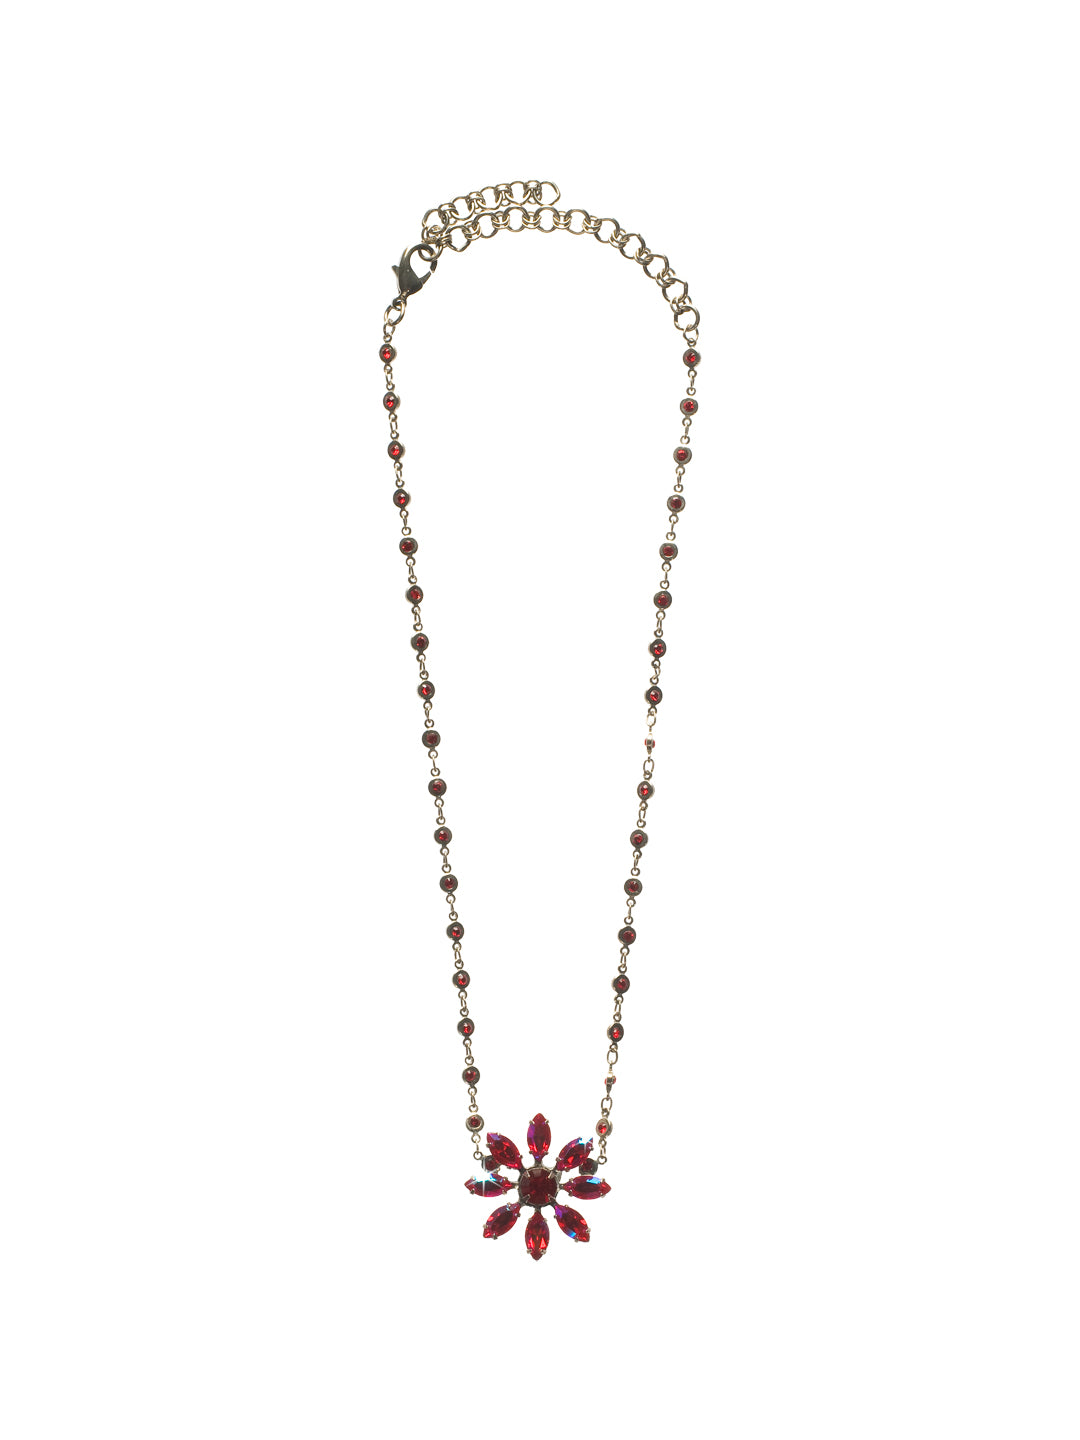 Petite Crystal Flower Pendant - NBP116ASCB - Sparkle in full bloom! This crystal flower pendant will add sparkle and radiance to your every day. From Sorrelli's Cranberry collection in our Antique Silver-tone finish.